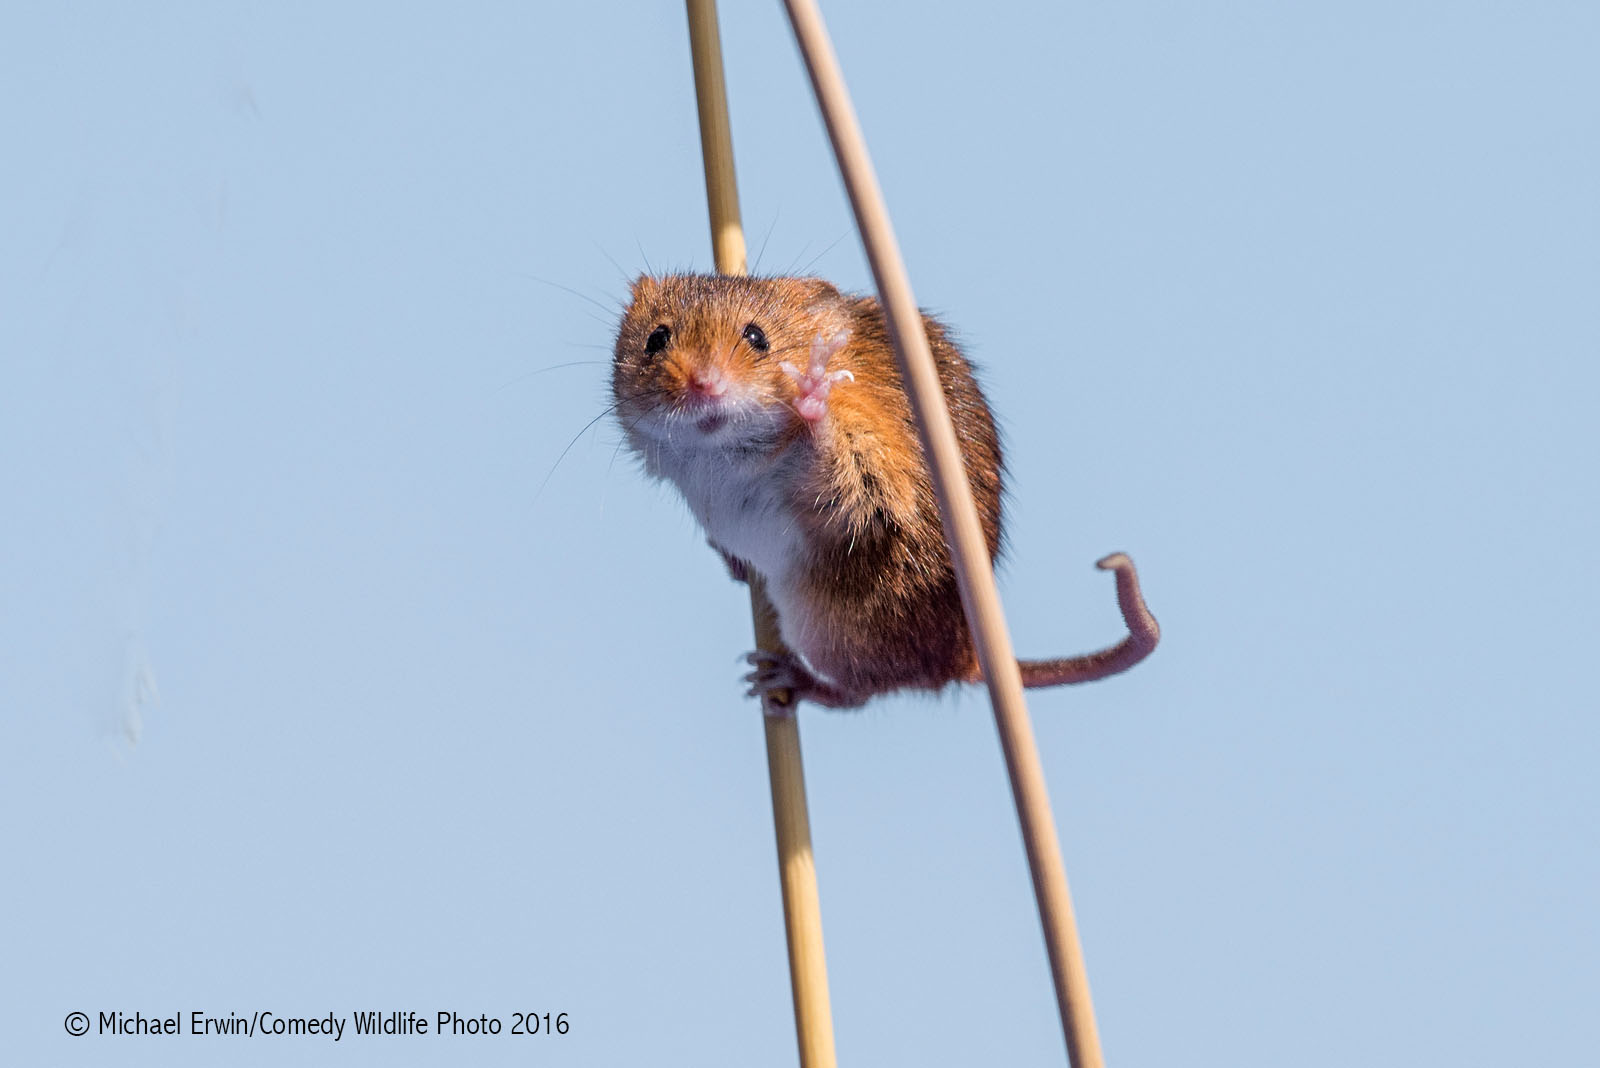 Michael Erwin Stoke On Trent Phone: 07900130434 Email: mufftrix@mail.com Title: Waving Harvest Mouse Description: A harvest mouse appearing to be waving at the camera :-) Animal: Harvest Mouse Location of shot: Cheshire UK